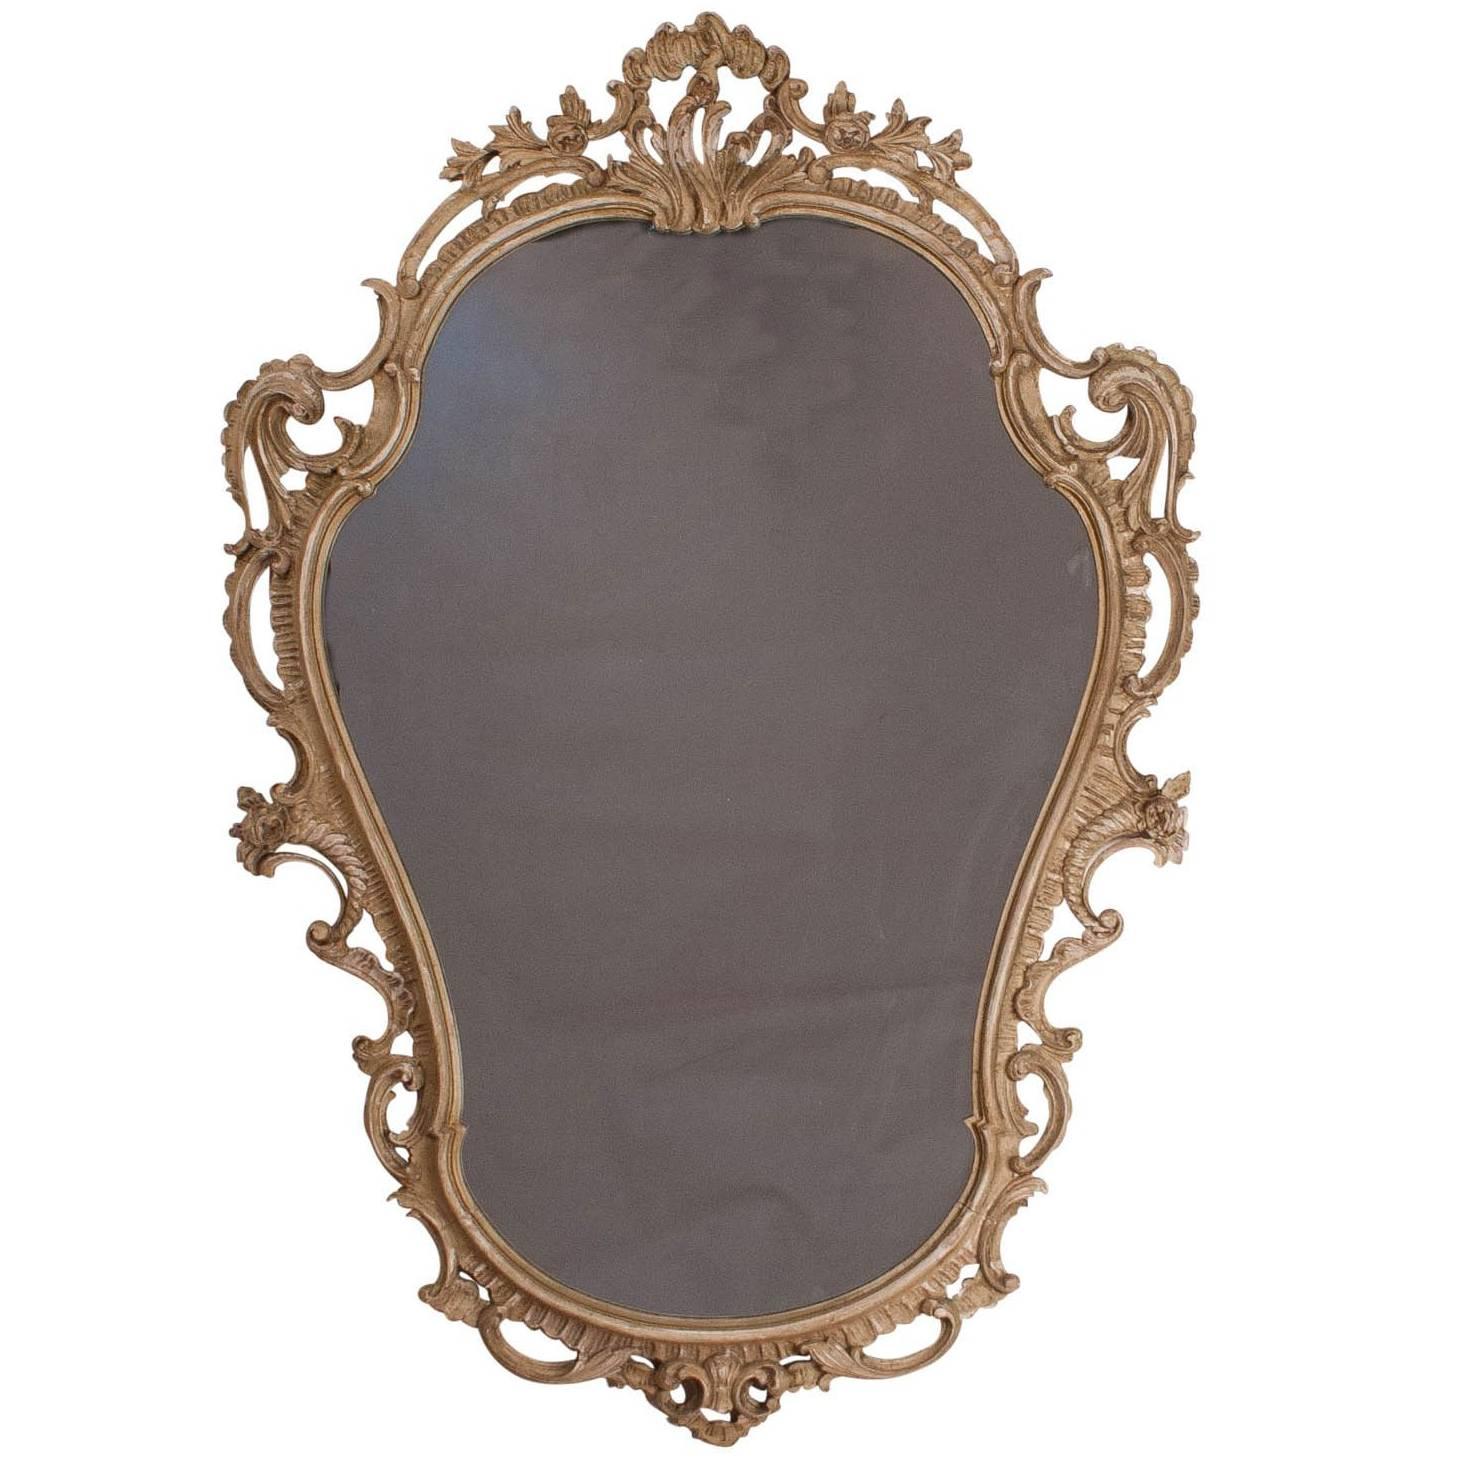 Vintage Hand-Carved and Bone Painted Baroque Style Mirror, England, 1920